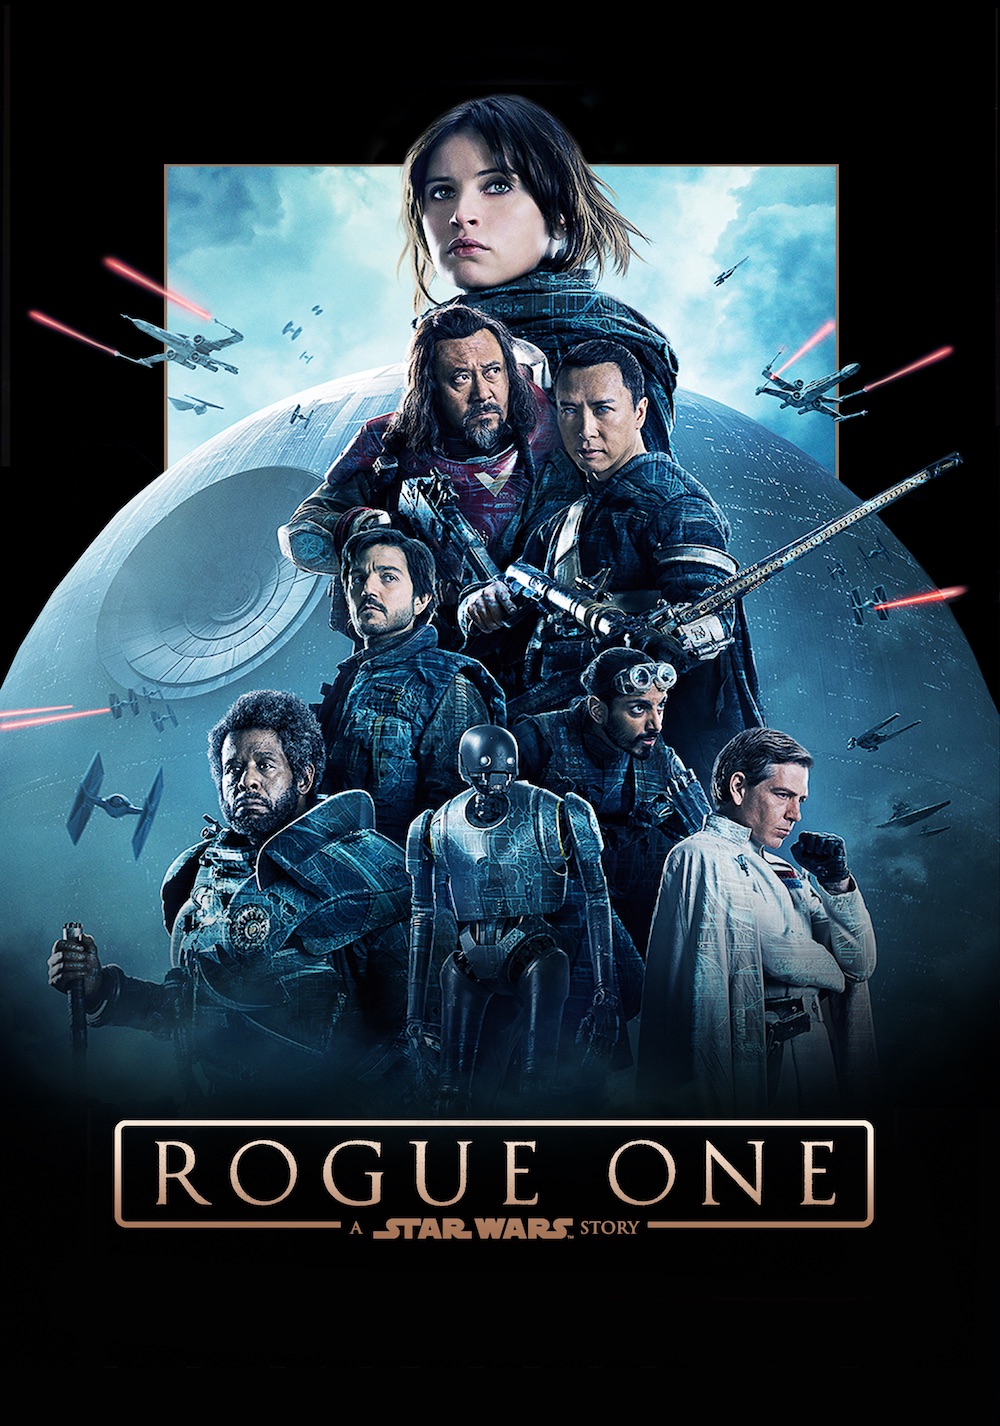 Star wars a rogue story - oasissafas